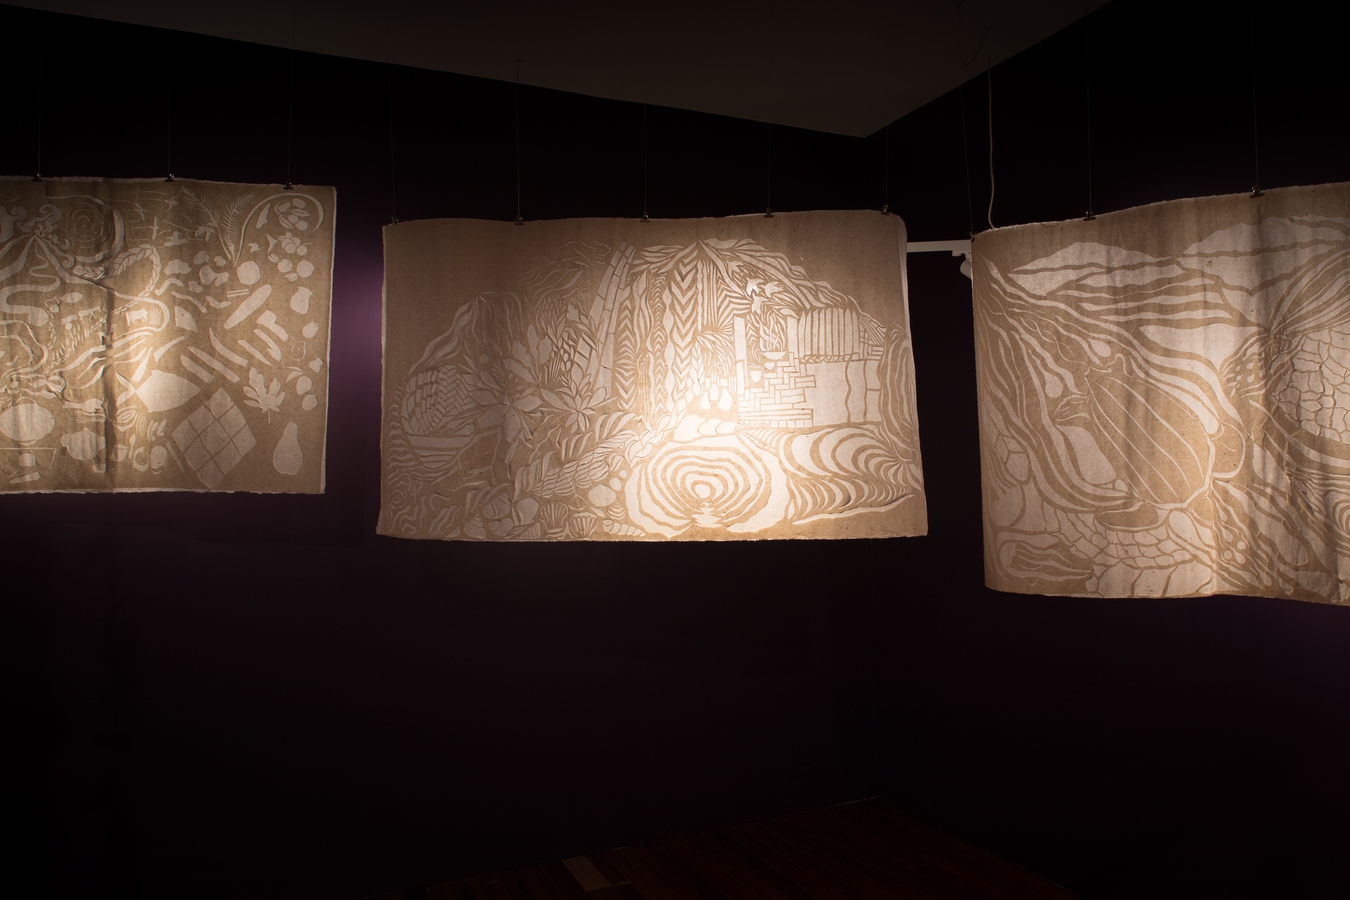 Image: Tessa Ma’auga, Longing for homeland (installation view), 2022. Photo: Janneth Gil.